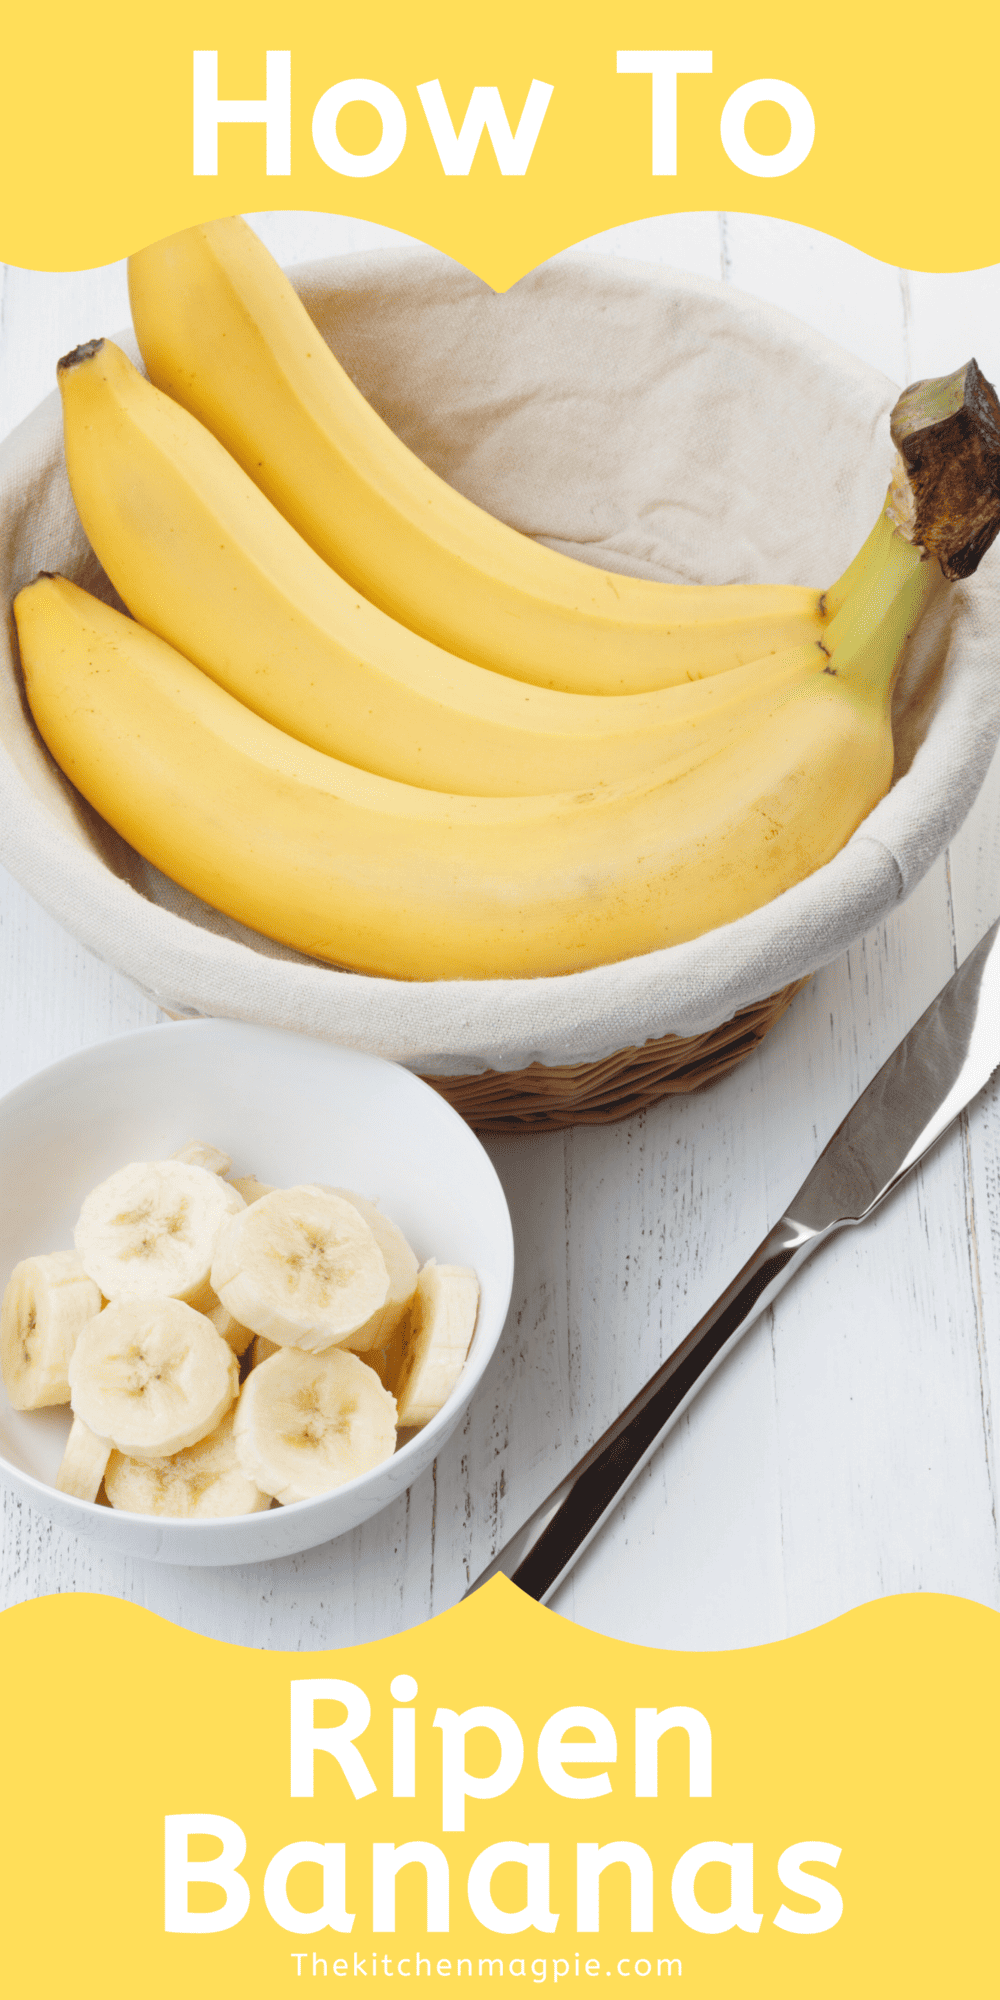 Curious how to ripen up bananas that you just picked up from the store? Follow this simple how-to to get them nice and yellow in no time.